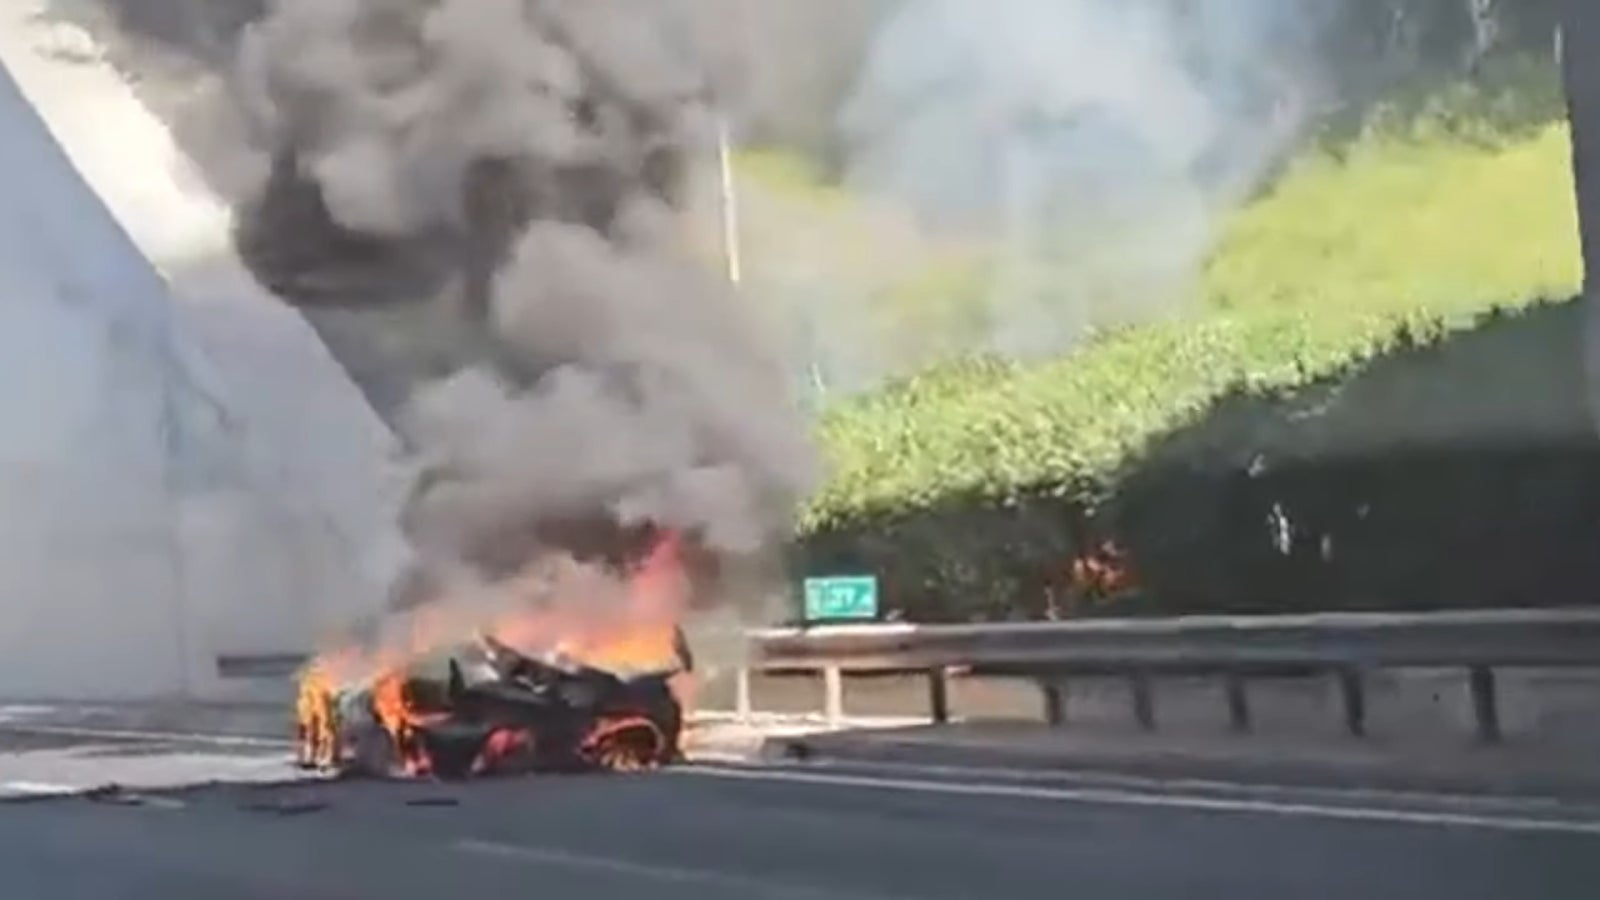 The screenshot shows a car on fire on the side of the road. 